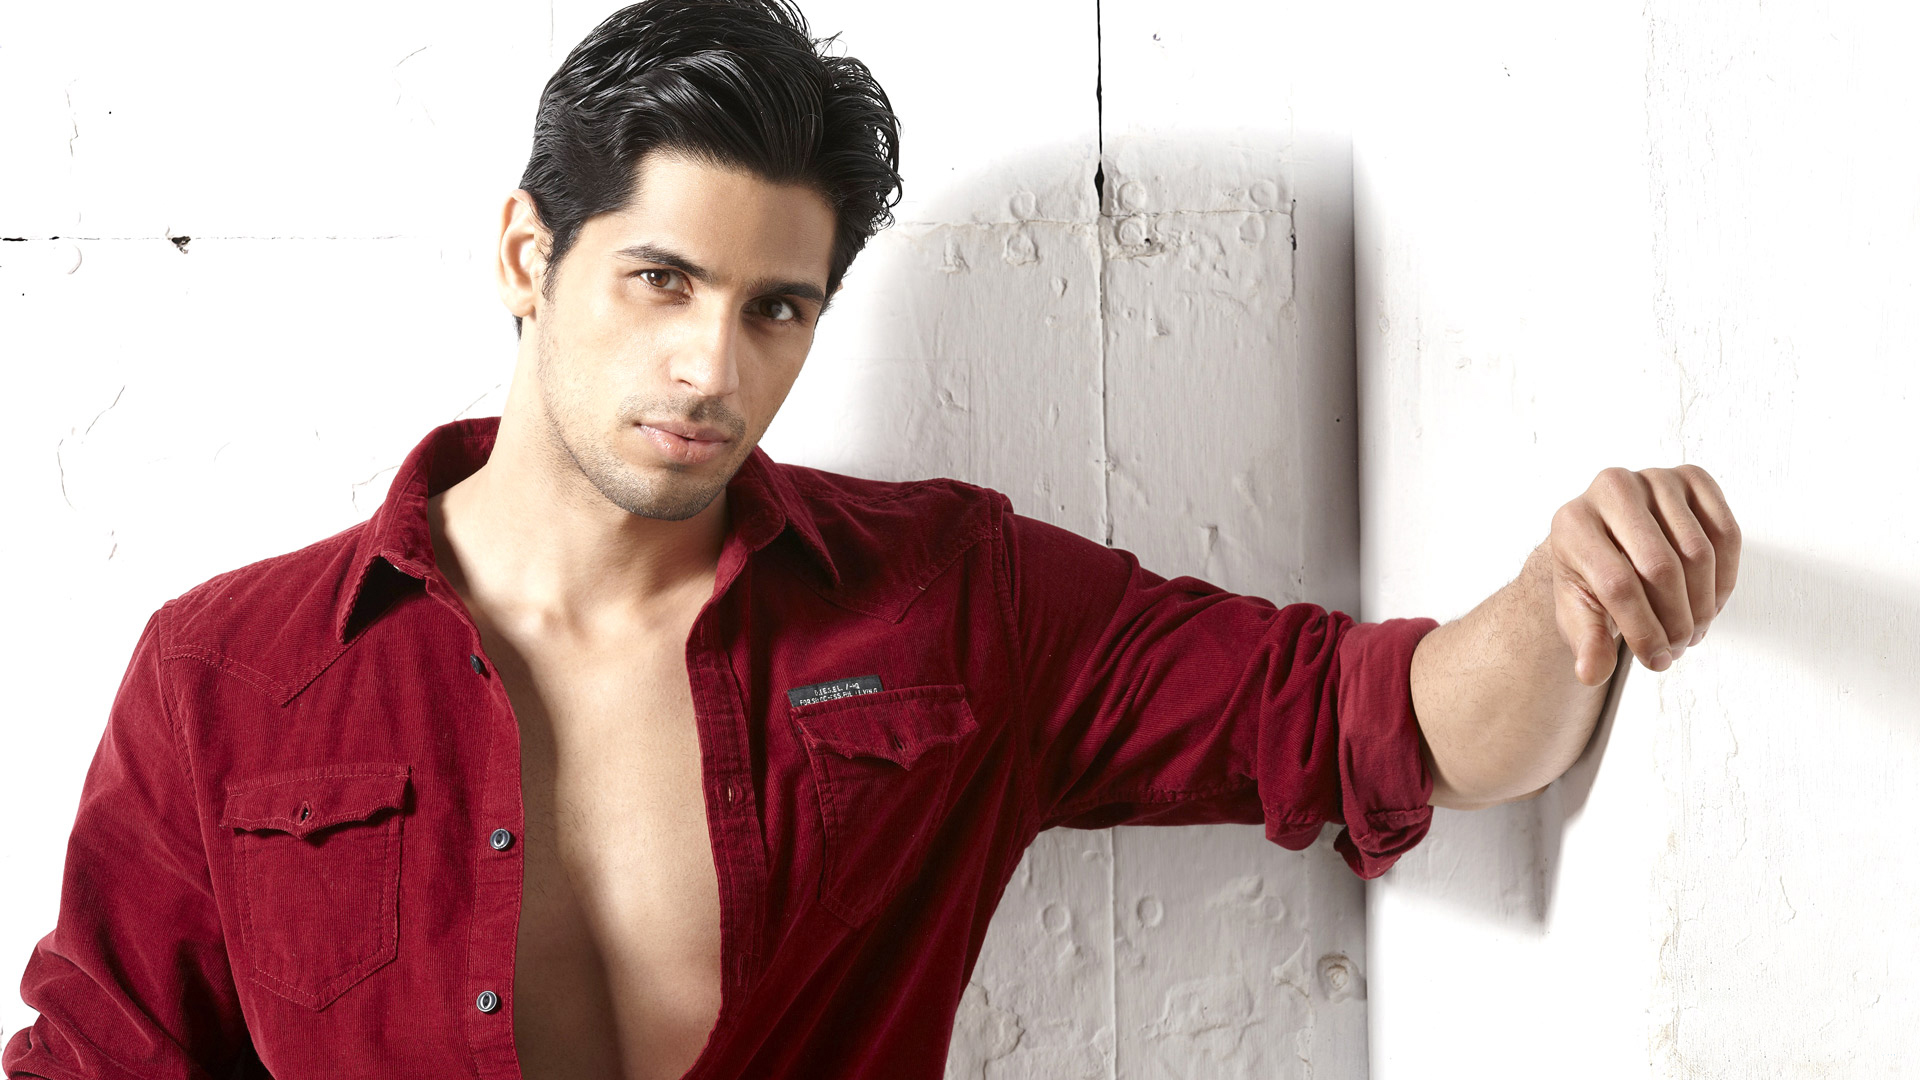 200 Sidharth Malhotra HD Wallpapers Desktop Background  Android   iPhone 1080p 4k 1066x1332 2023